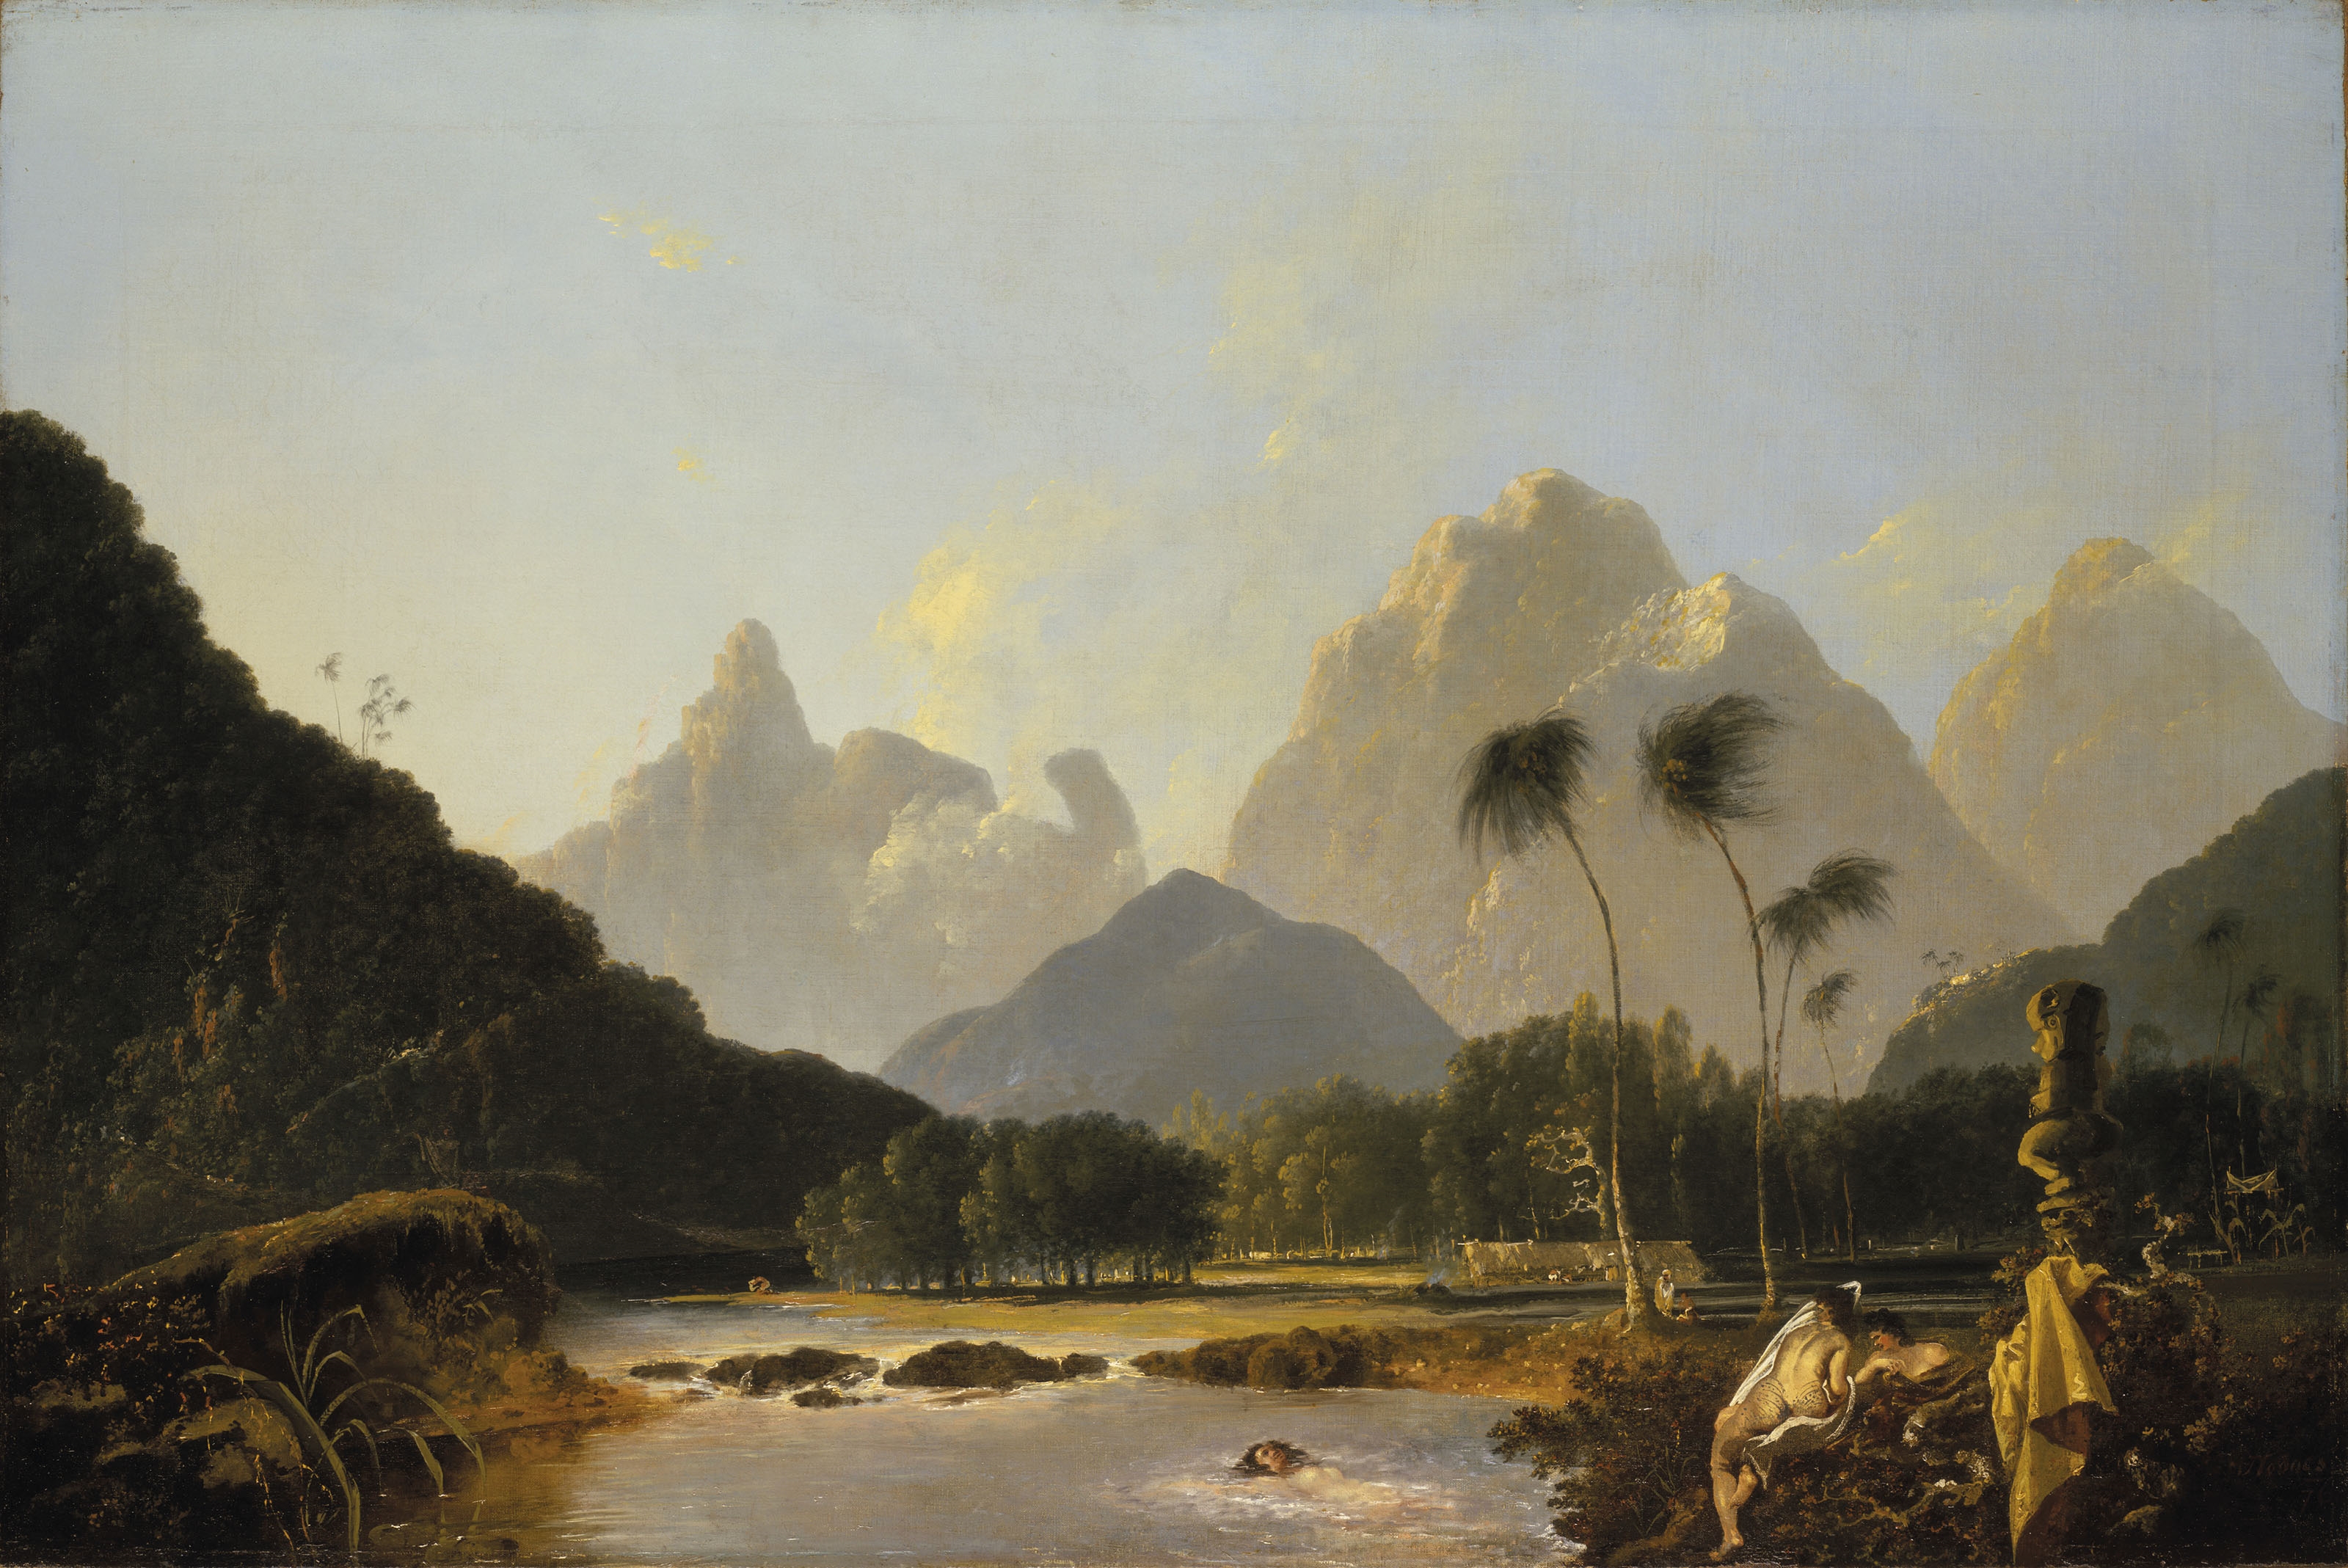 Artwork by William Hodges, A View of Vaitepiha Bay, Tahiti (Tautira Valley from Tautira Bay), Made of oil on canvas